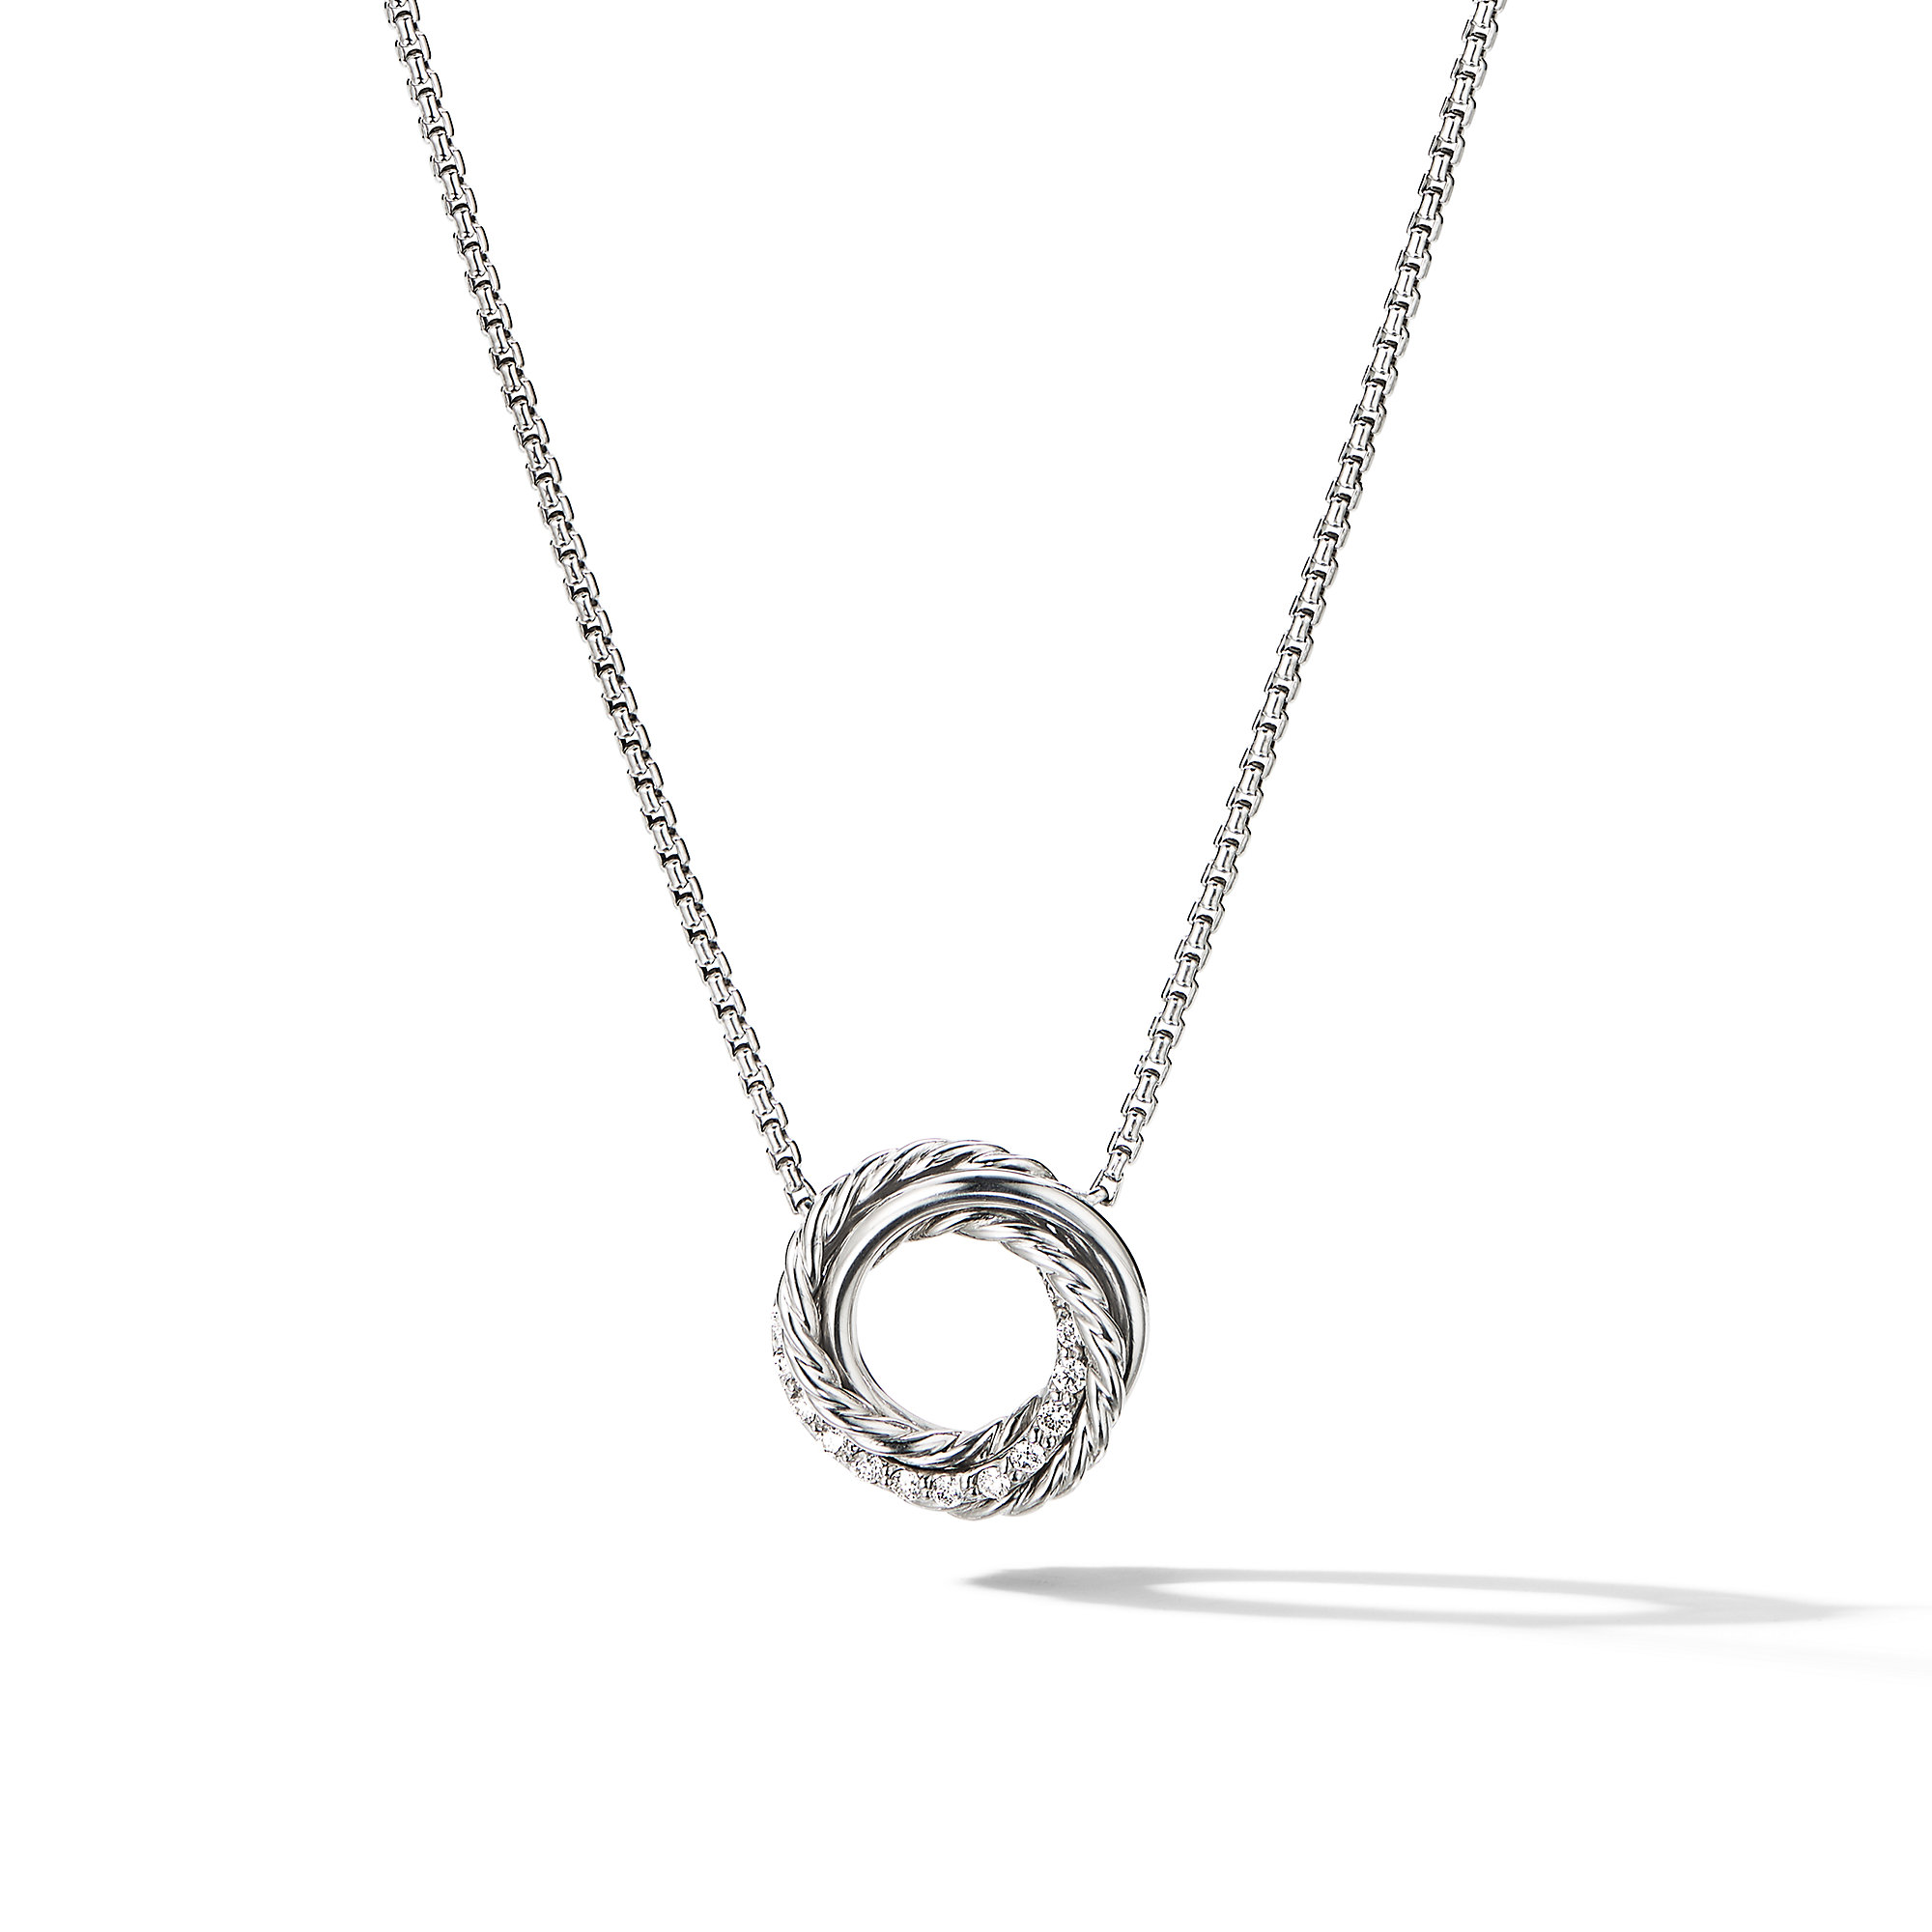 Crossover Pendant Necklace in Sterling Silver with Diamonds, 14.5mm